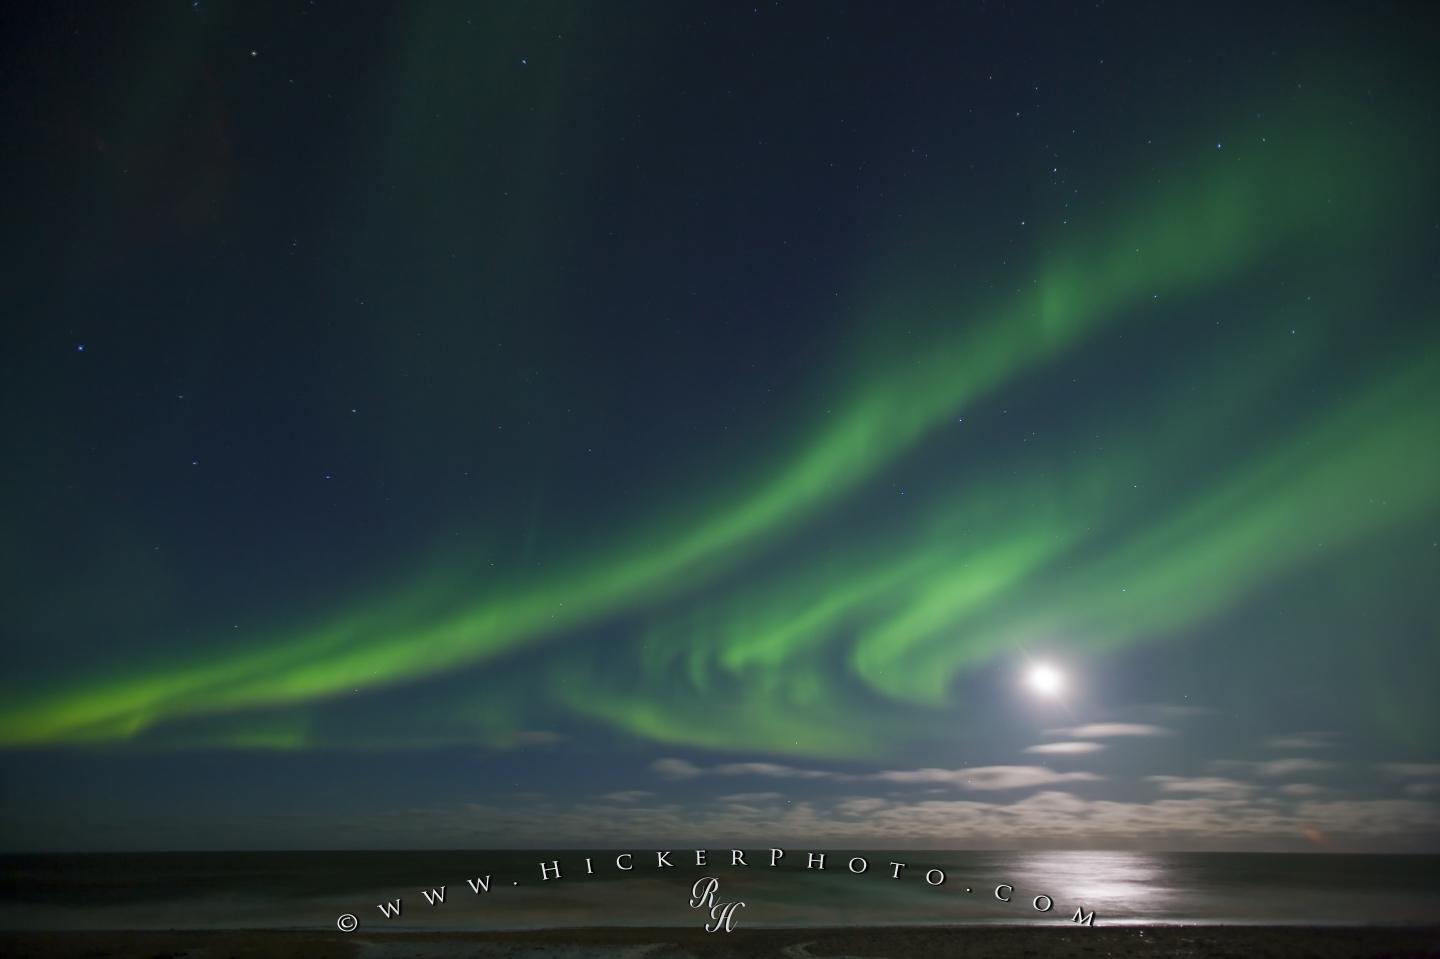 Of Light Over Hudson Bay In Manitoba Canada While The Northern Lights